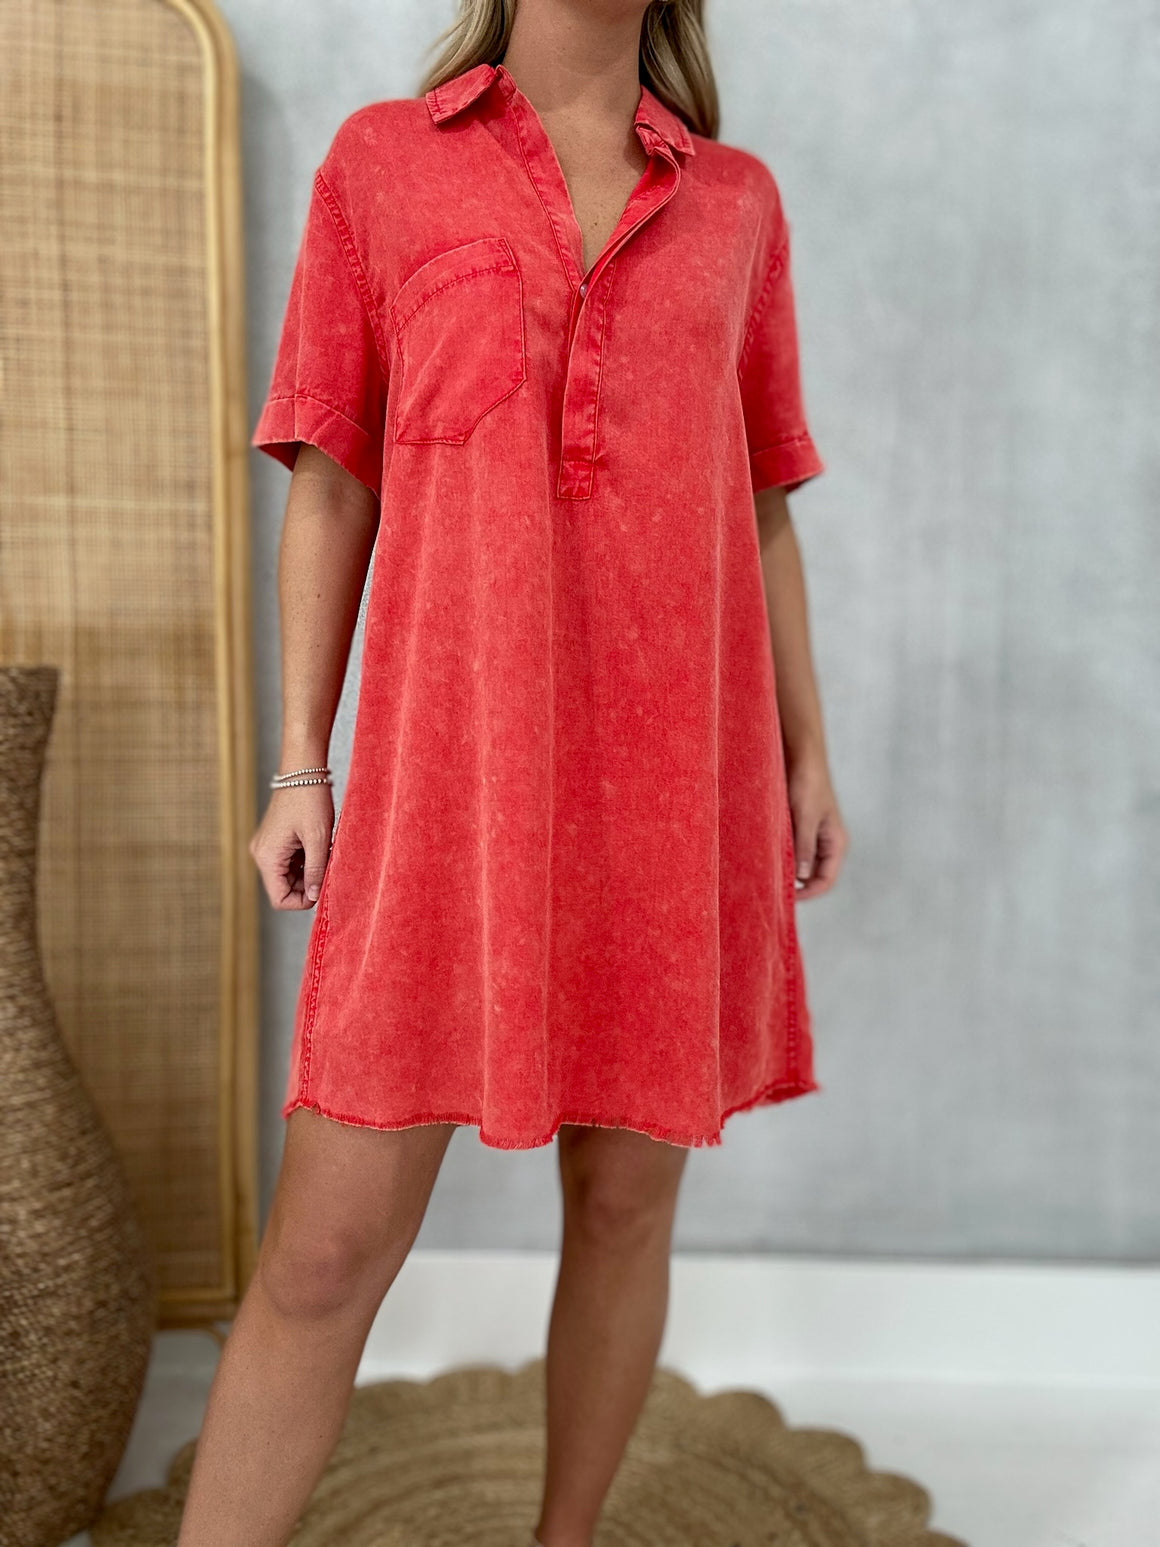 The Last Minute Shirt Dress - Red